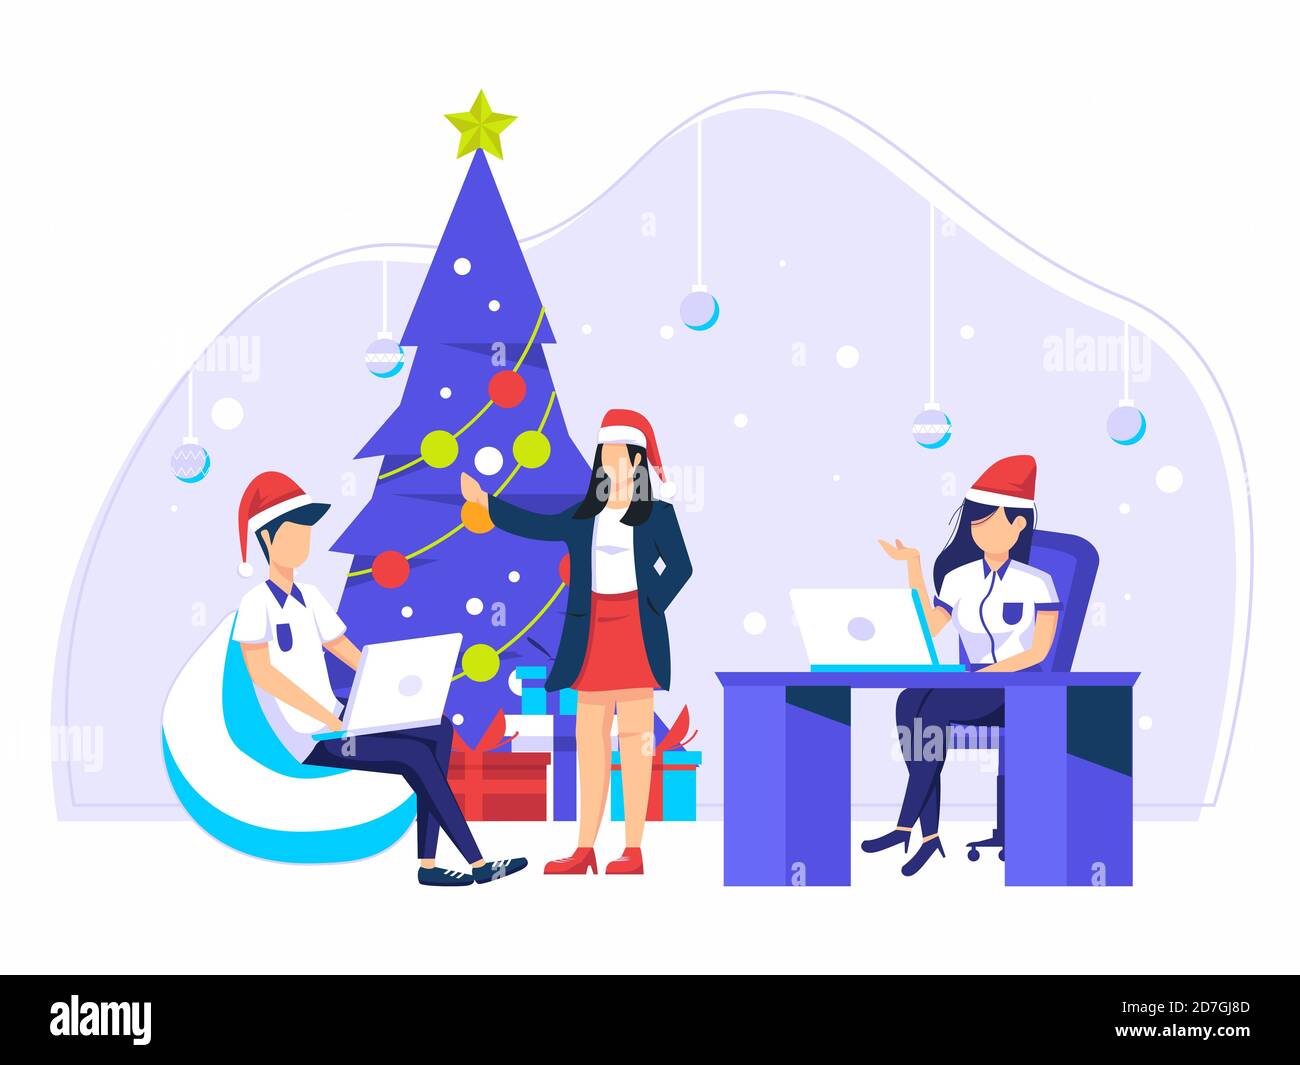 Team work is preparing for the new year, company in the office at work. Flat style vector illustration for web pages, social media, documents, cards. Stock Vector